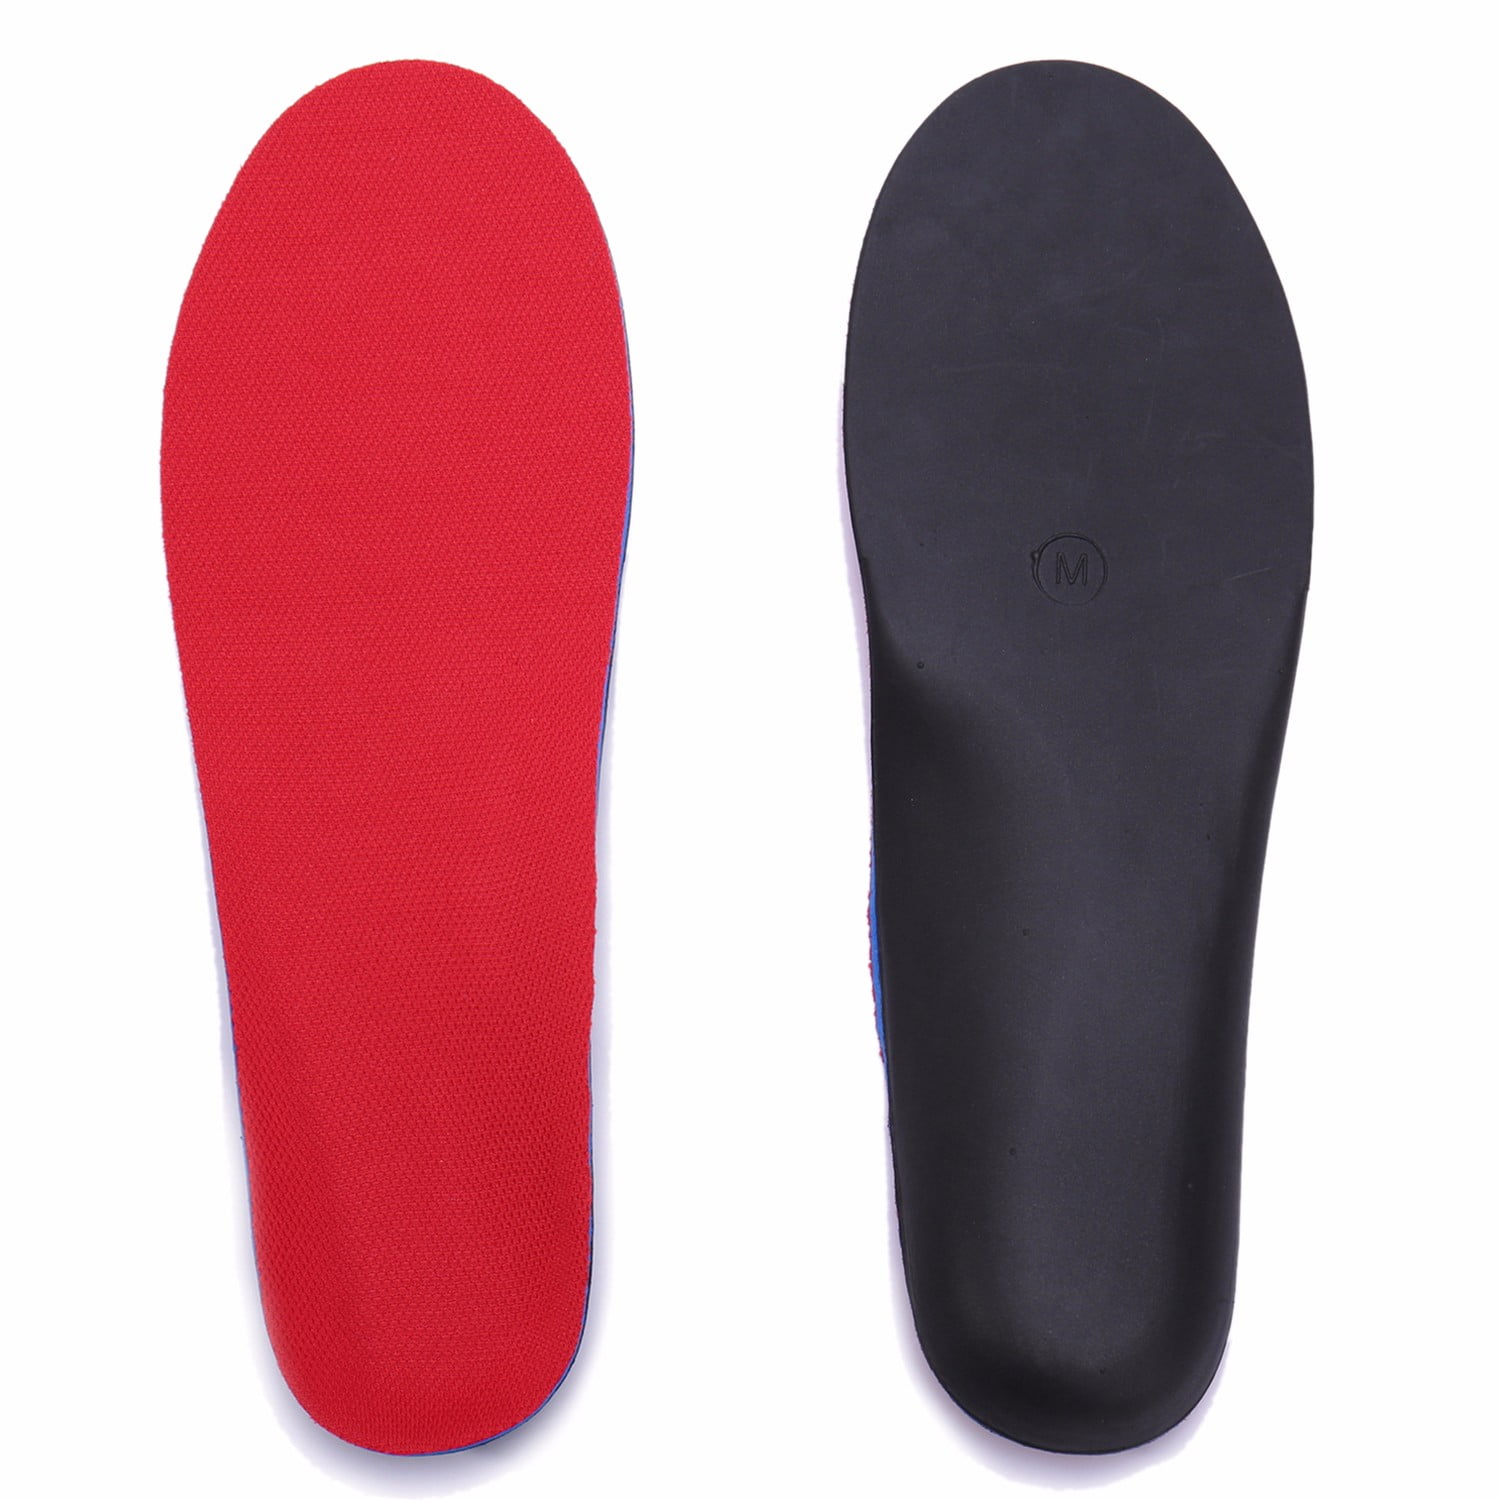 CFR Plantar Fasciitis Feet Insoles Arch Supports Orthotics Inserts Flat Relieve 